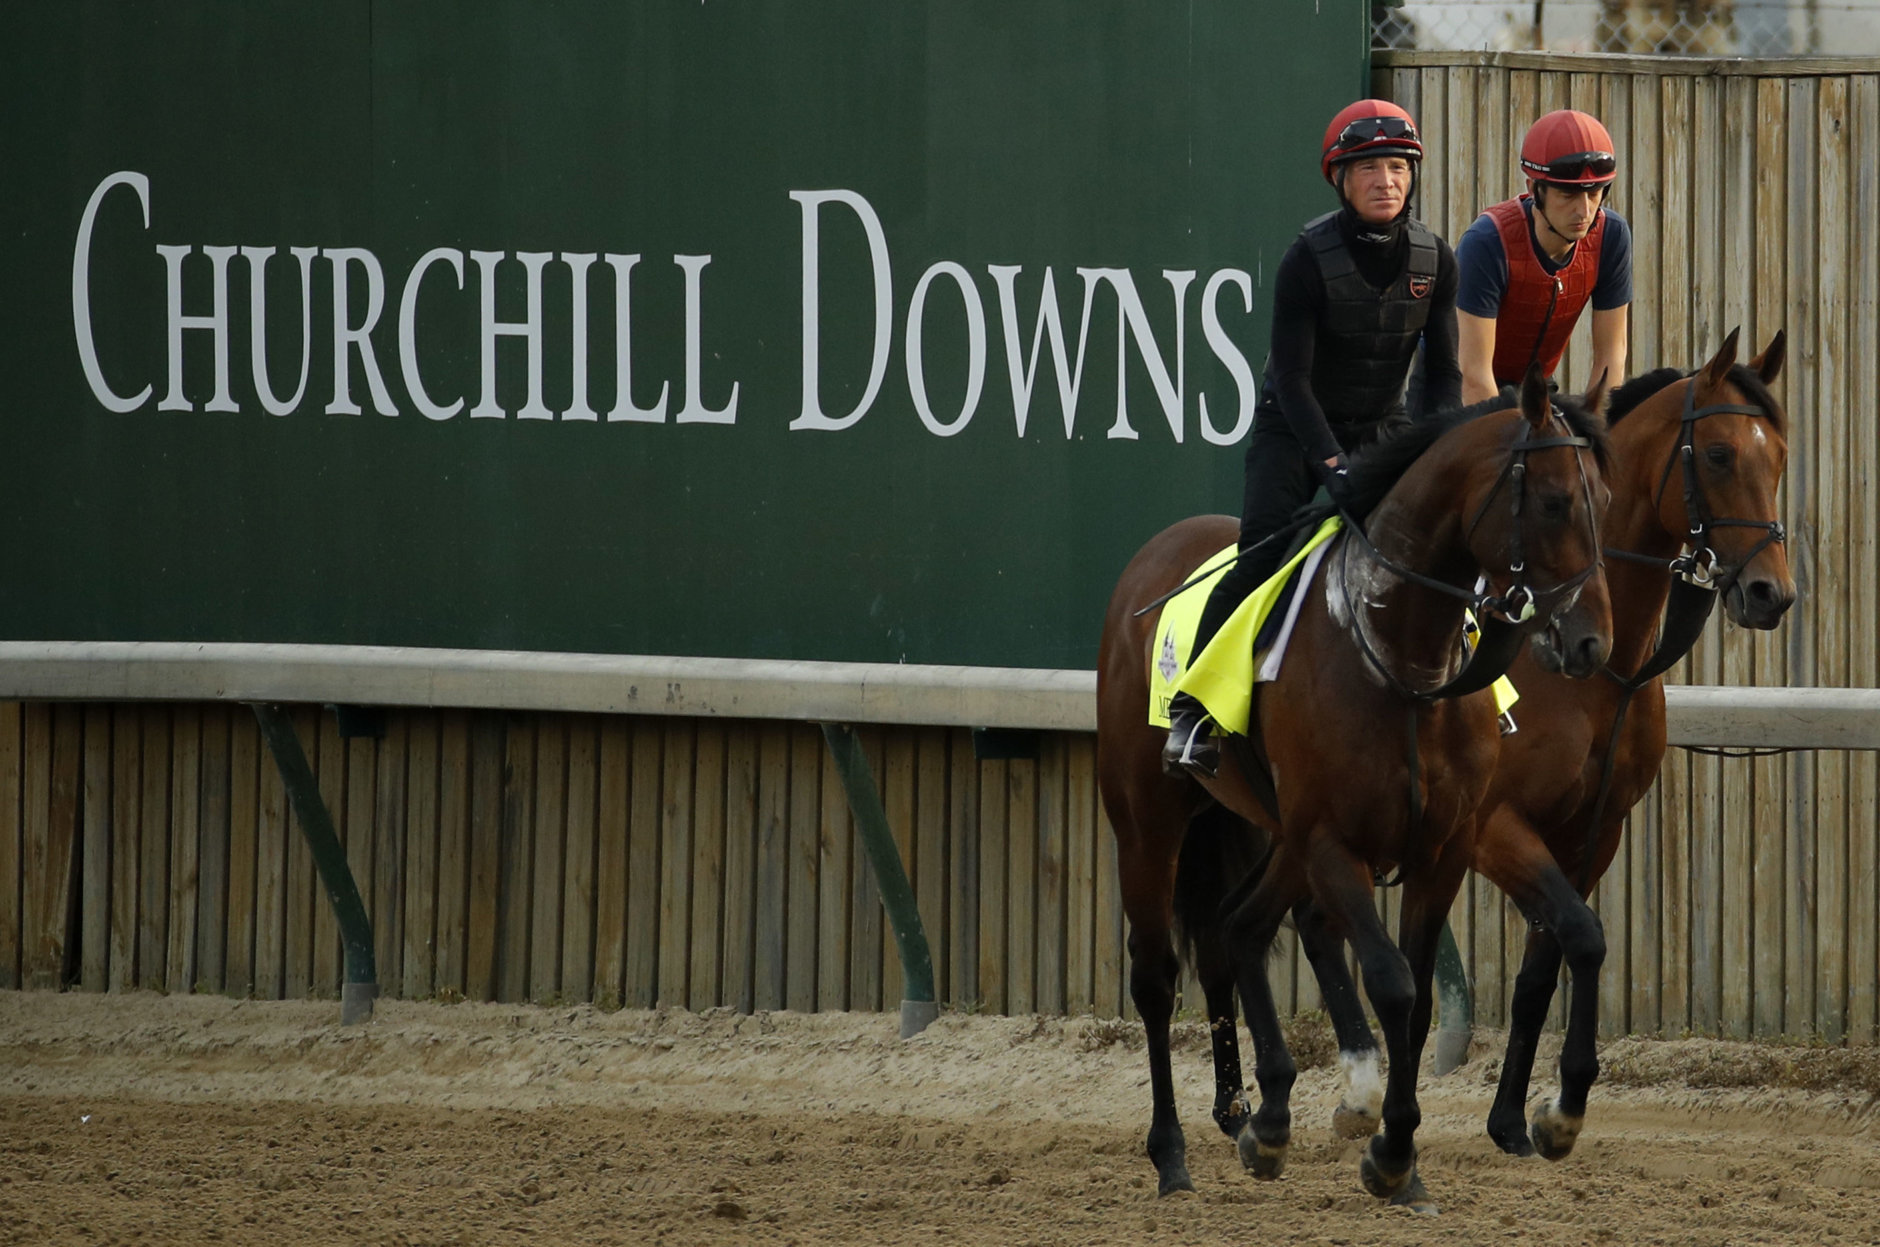 Kentucky Derby entrant Mendelssohn trains along with an outrider at Churchill Downs Thursday, May 3, 2018, in Louisville, Ky. The 144th running of the Kentucky Derby is scheduled for Saturday, May 5. (AP Photo/Charlie Riedel)